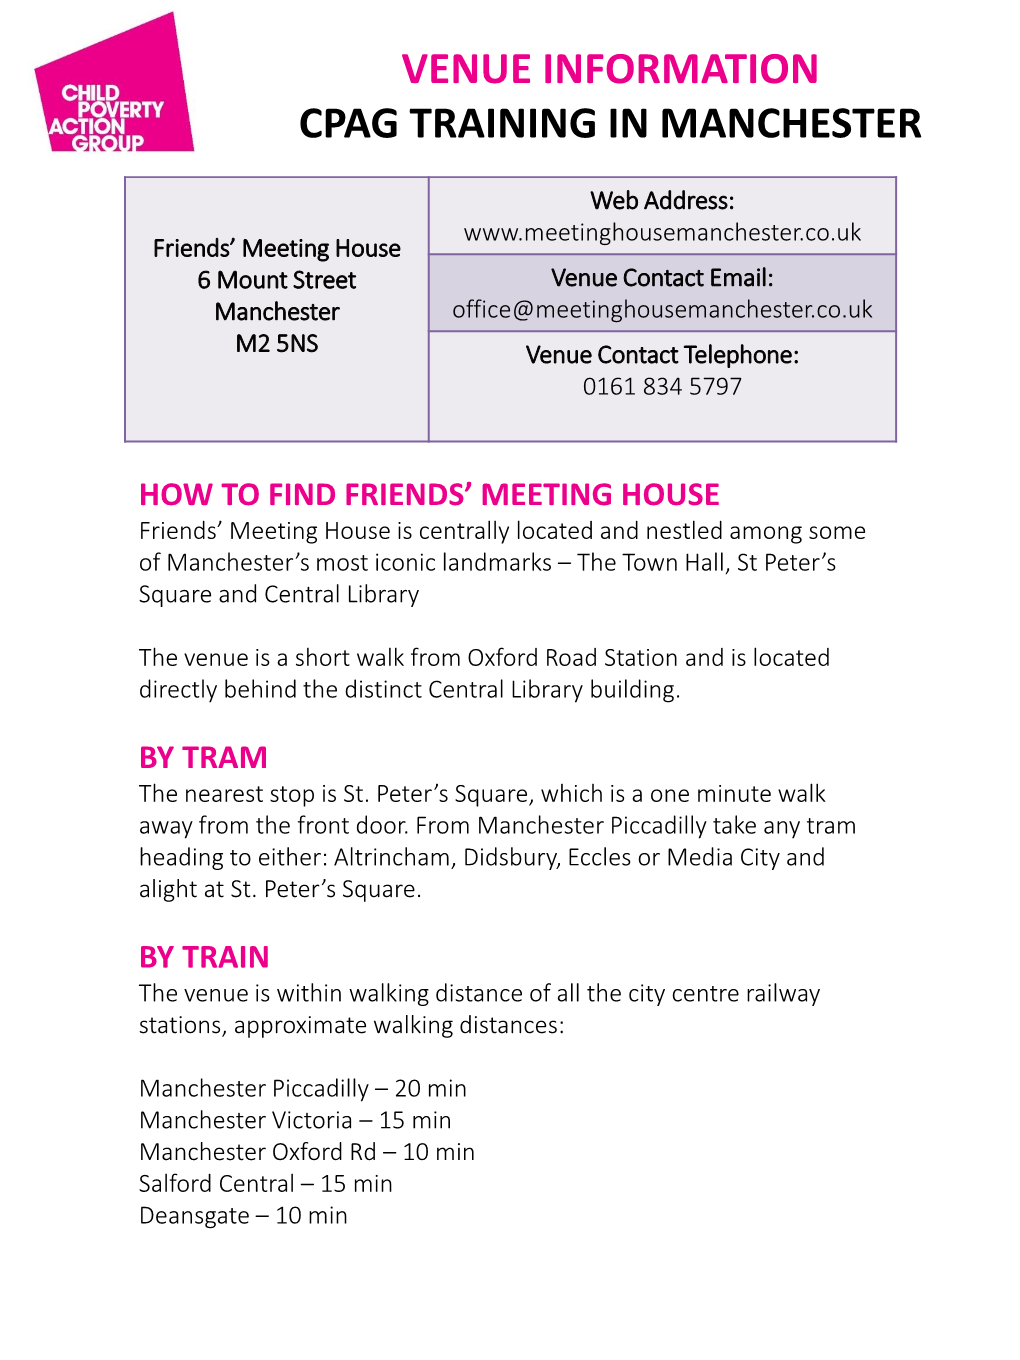 Venue Information Cpag Training in Manchester